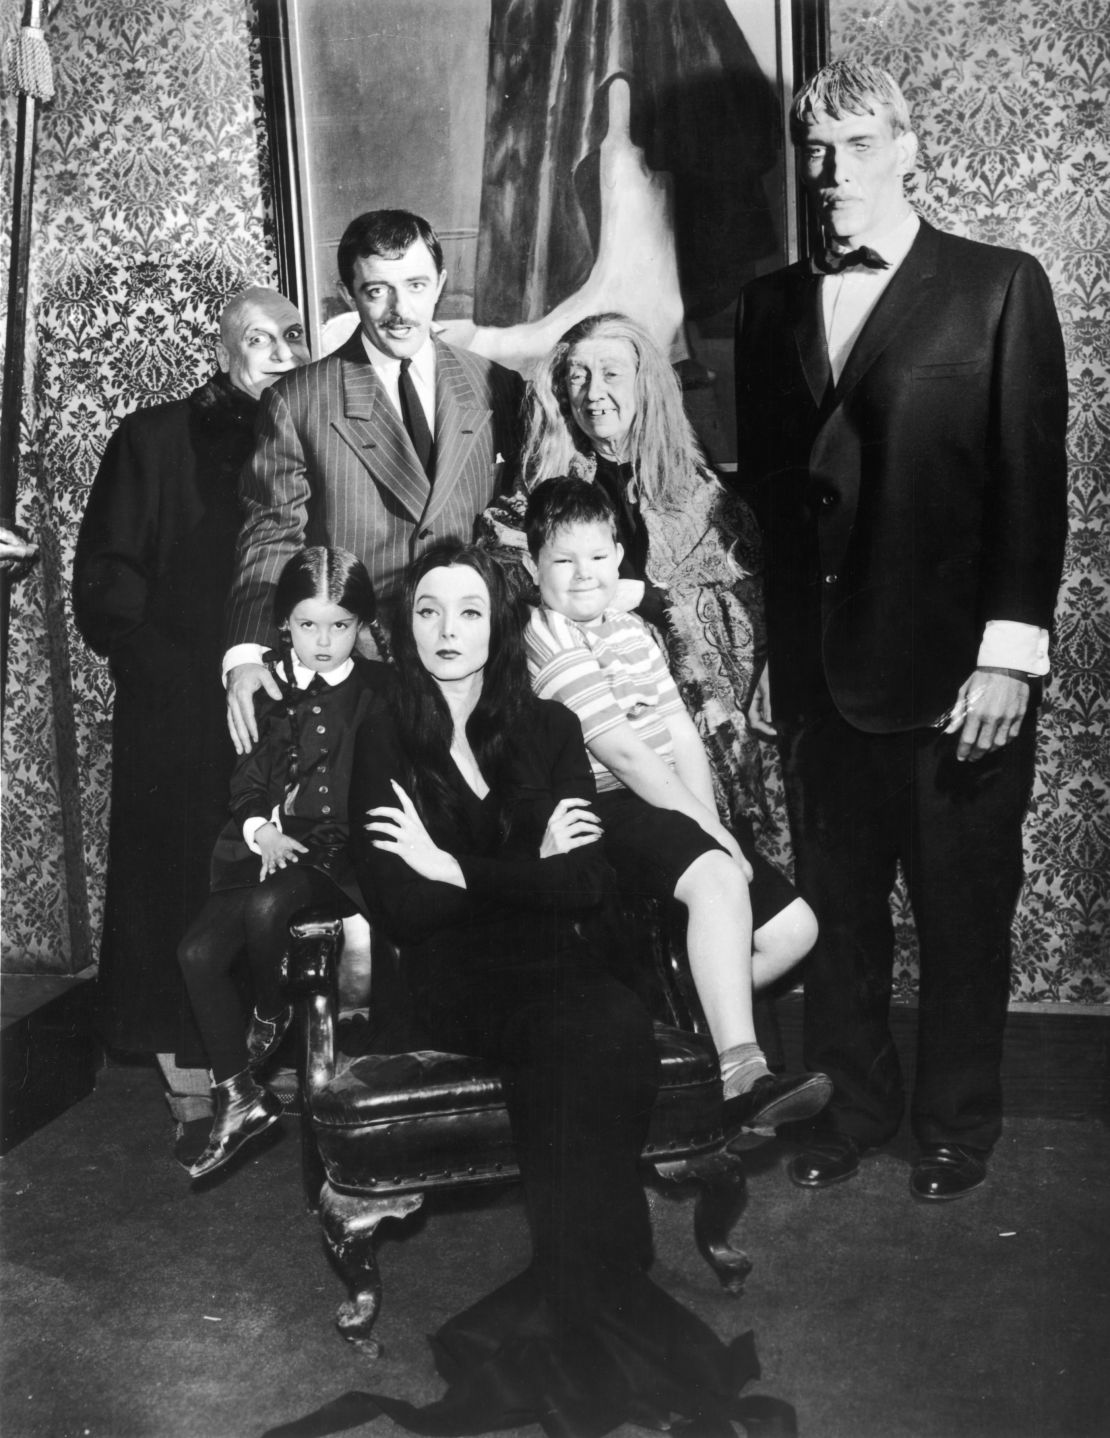 The Addams Family cast